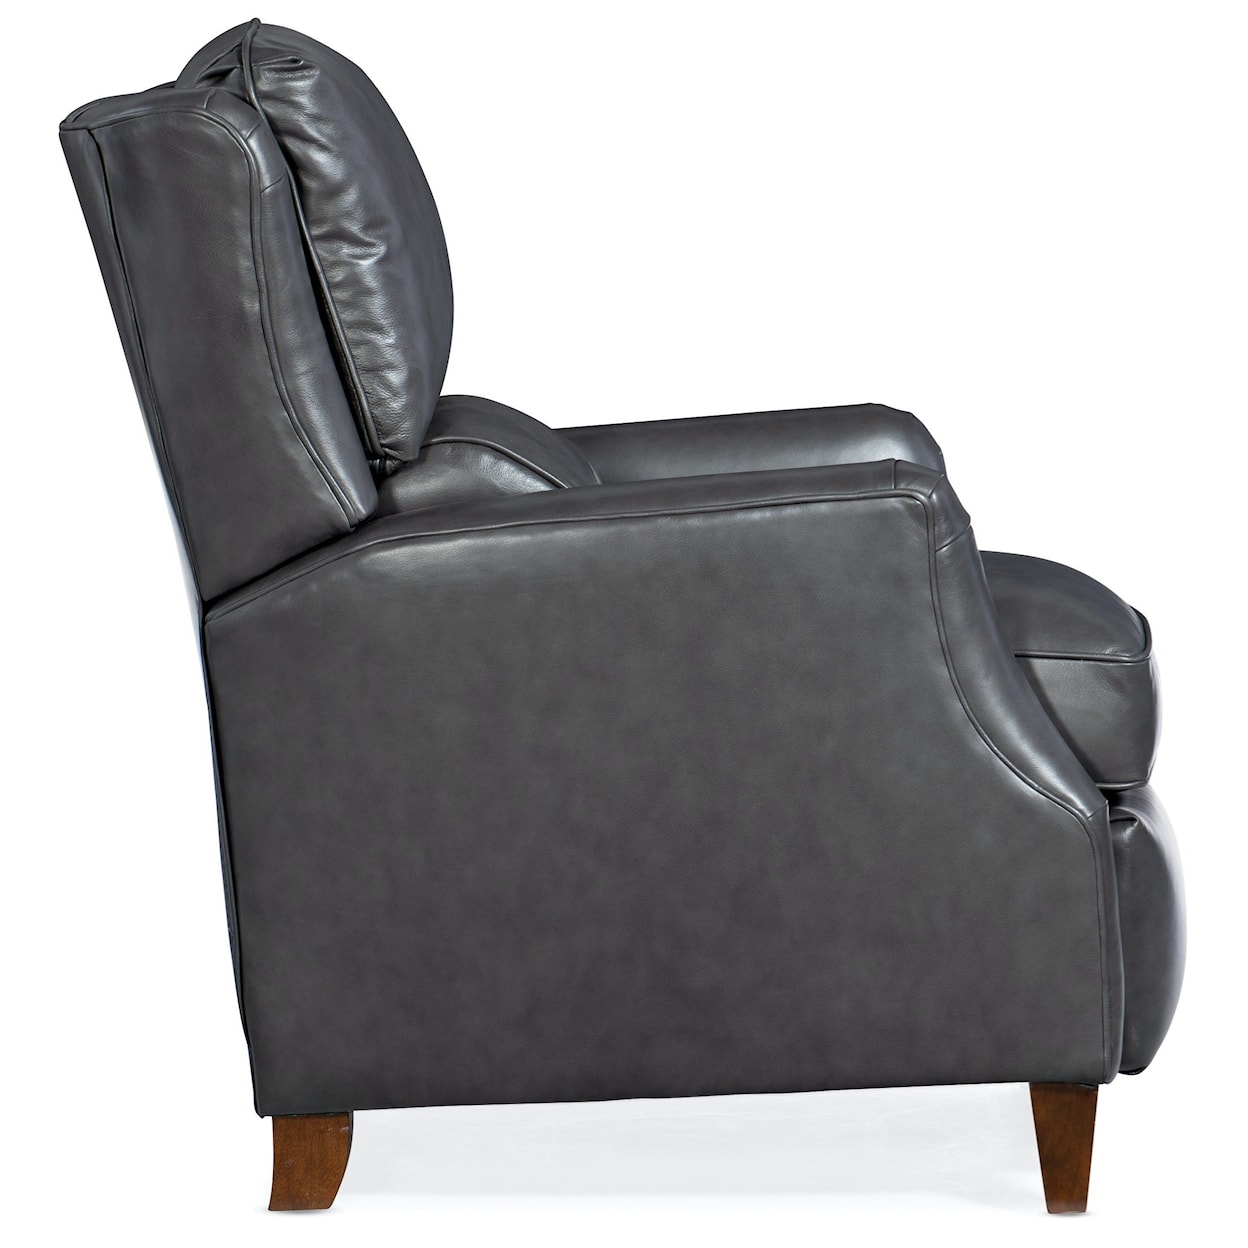 Bradington Young Chairs That Recline Recliner